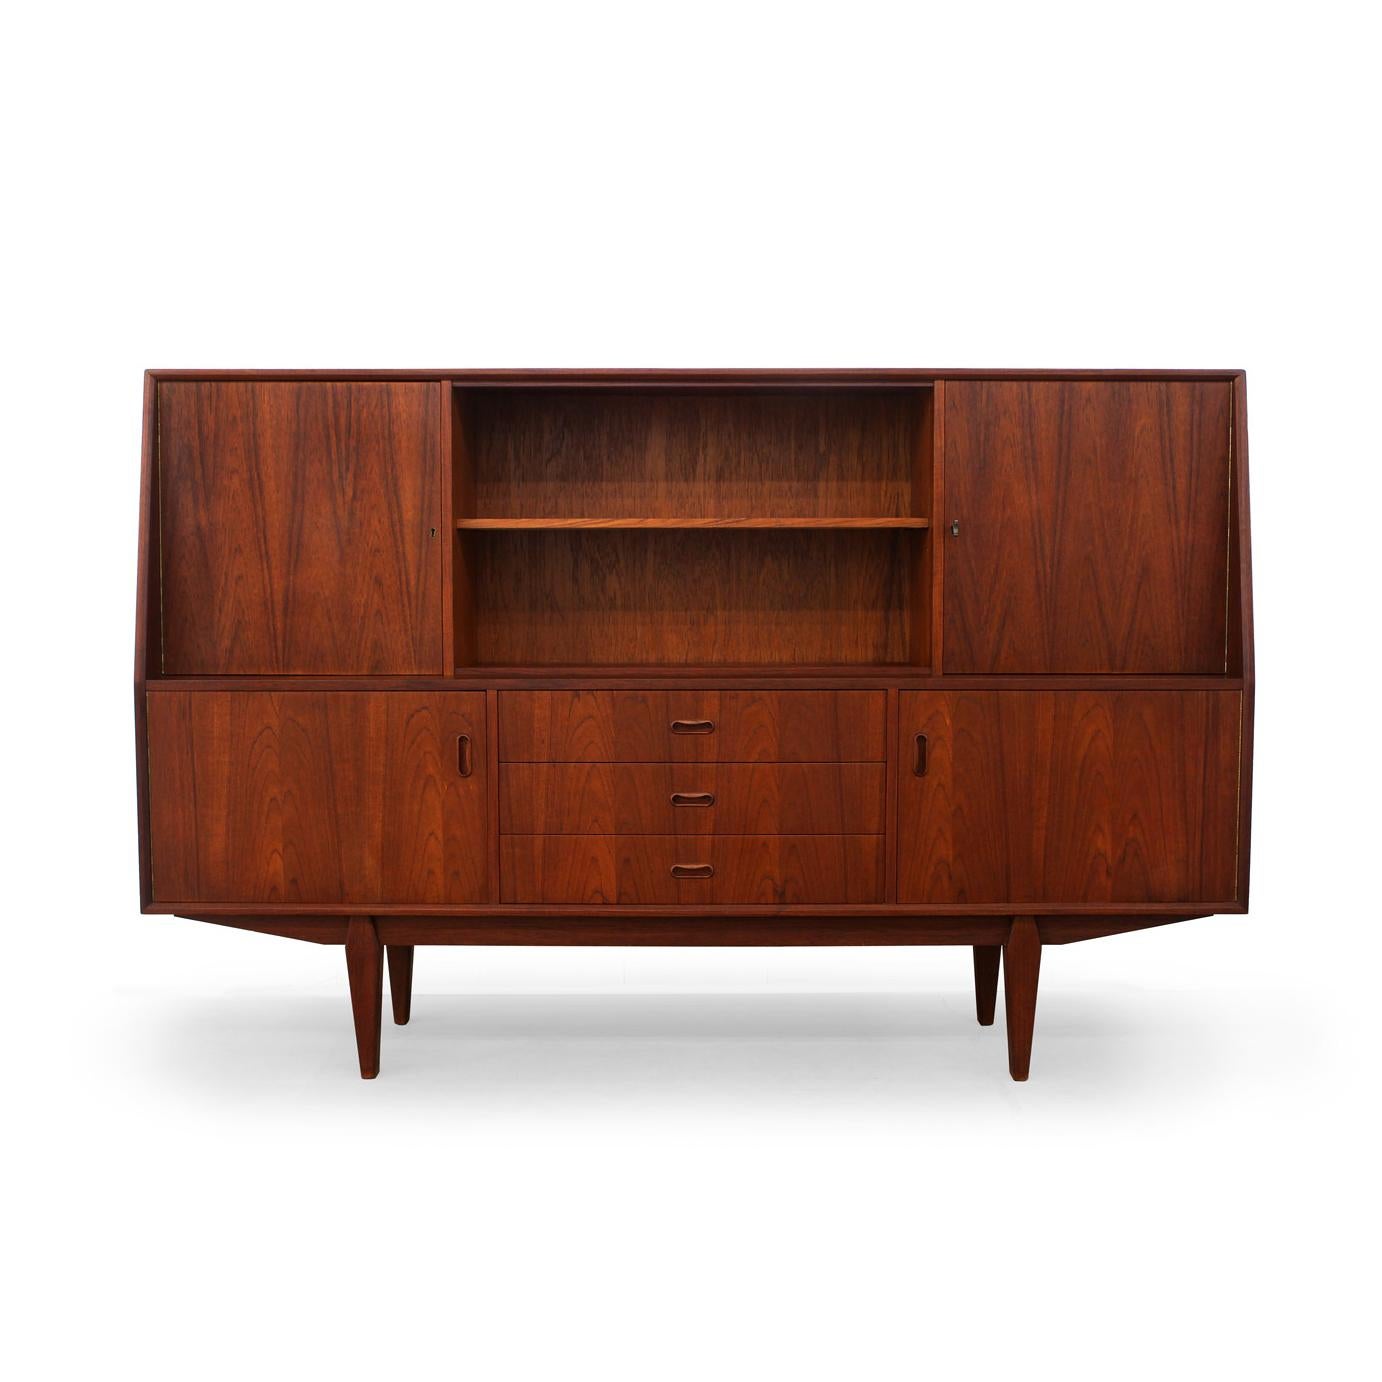 This teak Credenza features two upper locking cabinets with original key, an open shelf area with removable sliding glass doors, two lower cabinets and three drawers with dovetailed construction. This piece sits atop tapered legs and provides ample